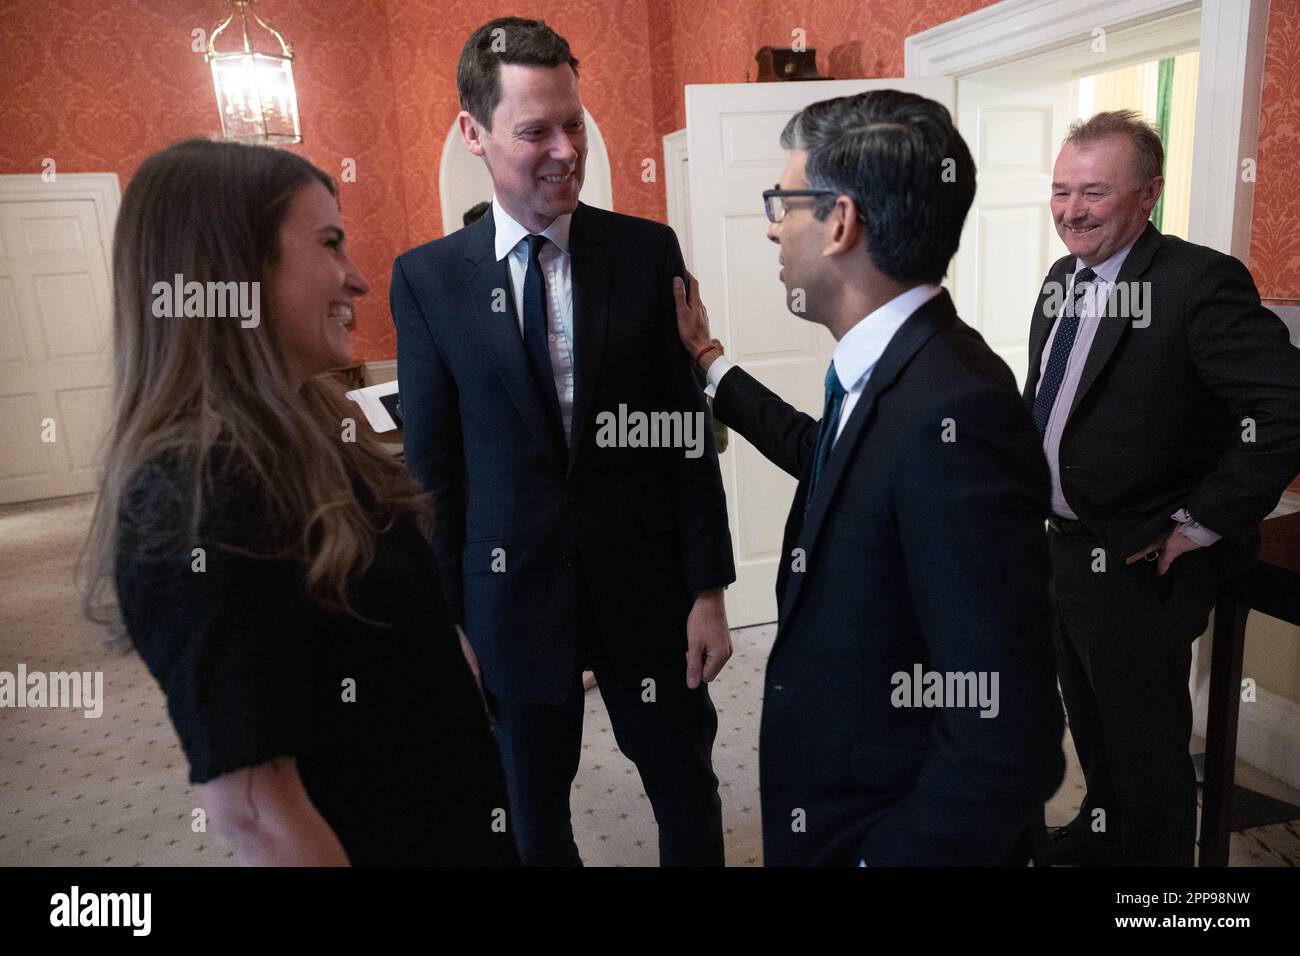 (230423) -- LONDON, April 23, 2023 (Xinhua) -- British Prime Minister Rishi Sunak (2nd R) talks with Alex Chalk (2nd L) in London, Britain, on April 21, 2023. United Kingdom (UK) Deputy Prime Minister Dominic Raab resigned on Friday, one day after an independent report into allegations that he bullied staff members while working at several government departments reached the desk of Prime Minister Rishi Sunak. Oliver Dowden, chancellor of the Duchy of Lancaster, has been appointed as the new deputy prime minister. Alex Chalk, currently serving as minister of state in the Ministry of Defence, Stock Photo